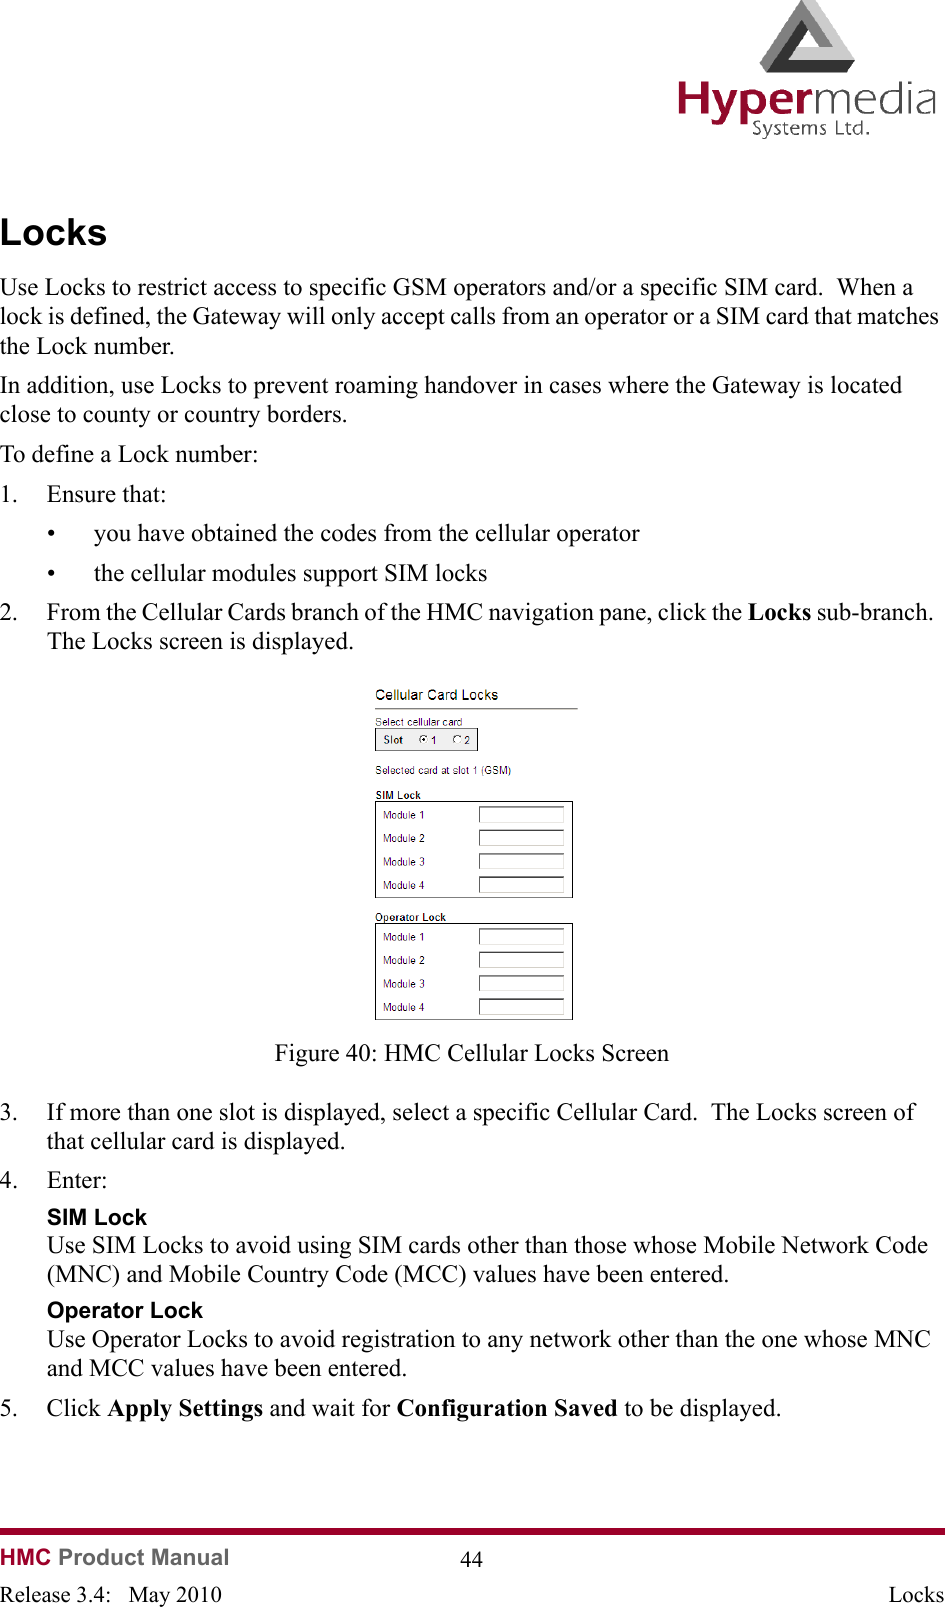   HMC Product Manual  44Release 3.4:   May 2010 LocksLocksUse Locks to restrict access to specific GSM operators and/or a specific SIM card.  When a lock is defined, the Gateway will only accept calls from an operator or a SIM card that matches the Lock number.In addition, use Locks to prevent roaming handover in cases where the Gateway is located close to county or country borders.To define a Lock number:1. Ensure that: • you have obtained the codes from the cellular operator• the cellular modules support SIM locks2. From the Cellular Cards branch of the HMC navigation pane, click the Locks sub-branch.  The Locks screen is displayed.              Figure 40: HMC Cellular Locks Screen3. If more than one slot is displayed, select a specific Cellular Card.  The Locks screen of that cellular card is displayed.4. Enter:SIM Lock Use SIM Locks to avoid using SIM cards other than those whose Mobile Network Code (MNC) and Mobile Country Code (MCC) values have been entered.Operator Lock Use Operator Locks to avoid registration to any network other than the one whose MNC and MCC values have been entered.5. Click Apply Settings and wait for Configuration Saved to be displayed.